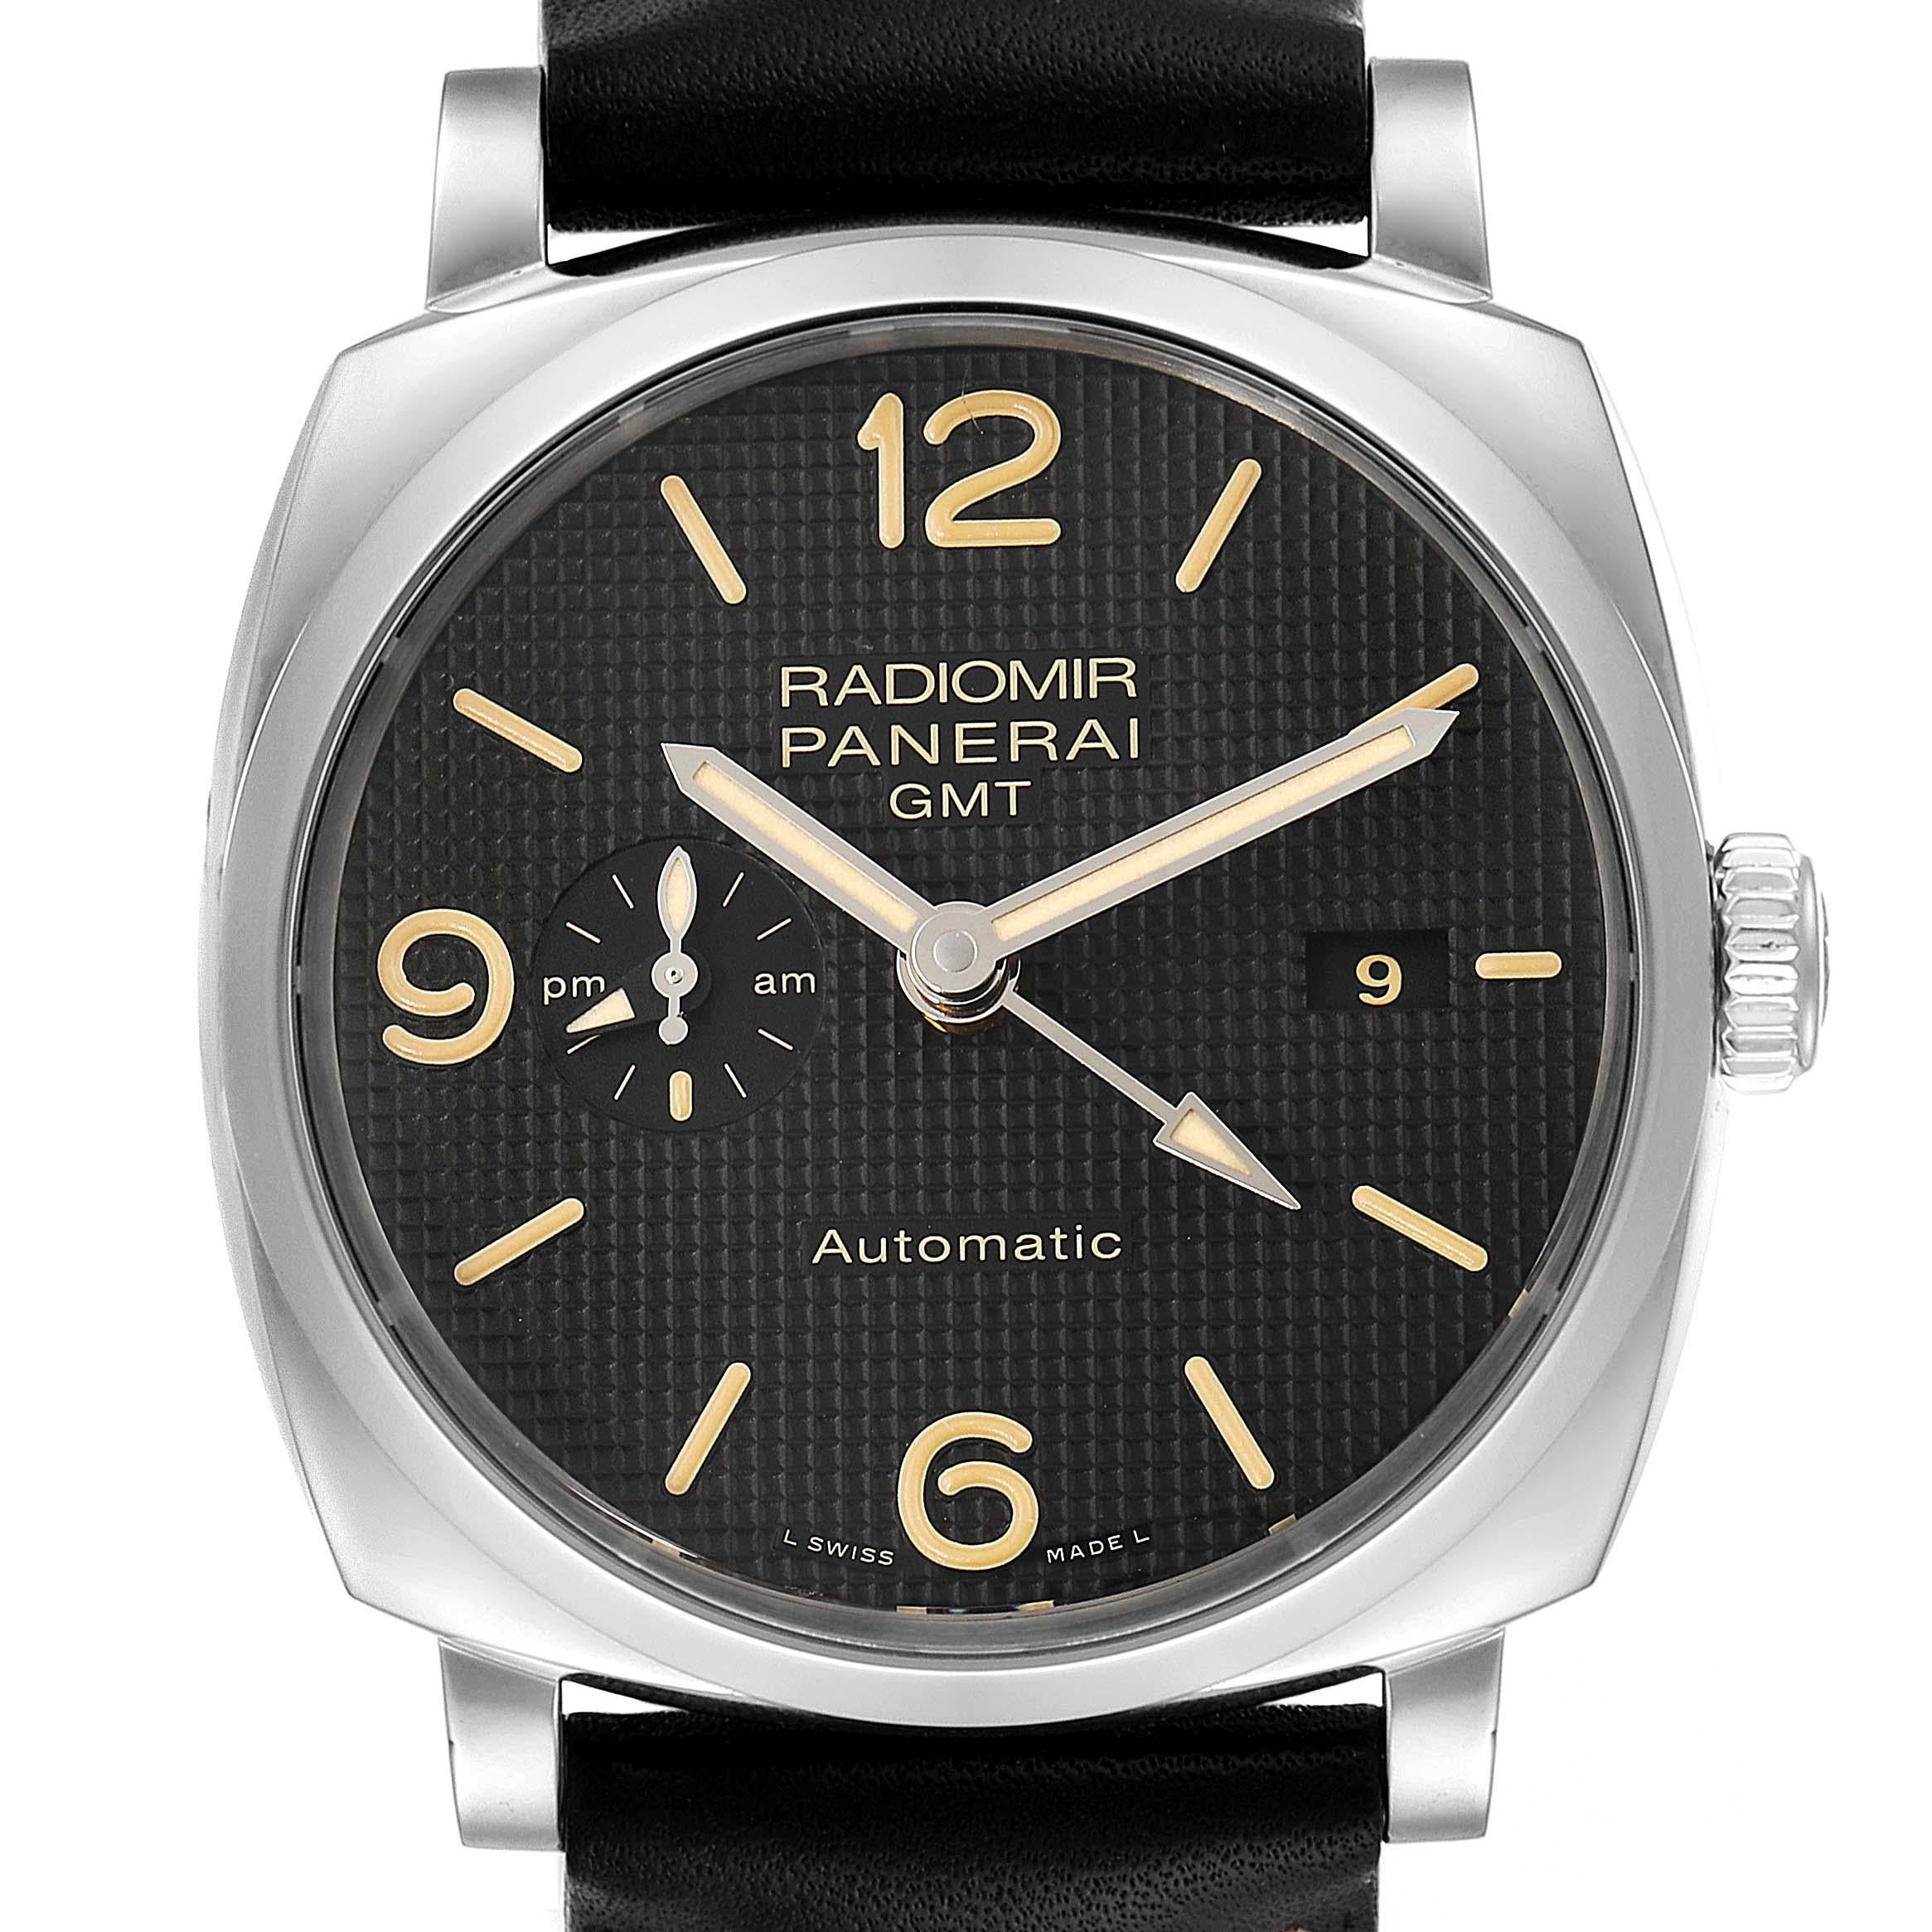 Panerai Radiomir 1940 Black Dial 45mm Steel Mens Watch PAM00627. Automatic self-winding movement. Caliber P.4001. Stainless steel cushion shaped case 45.0 mm in diameter. Exhibition sapphire crystal caseback. Stainless steel sloped bezel. Scratch